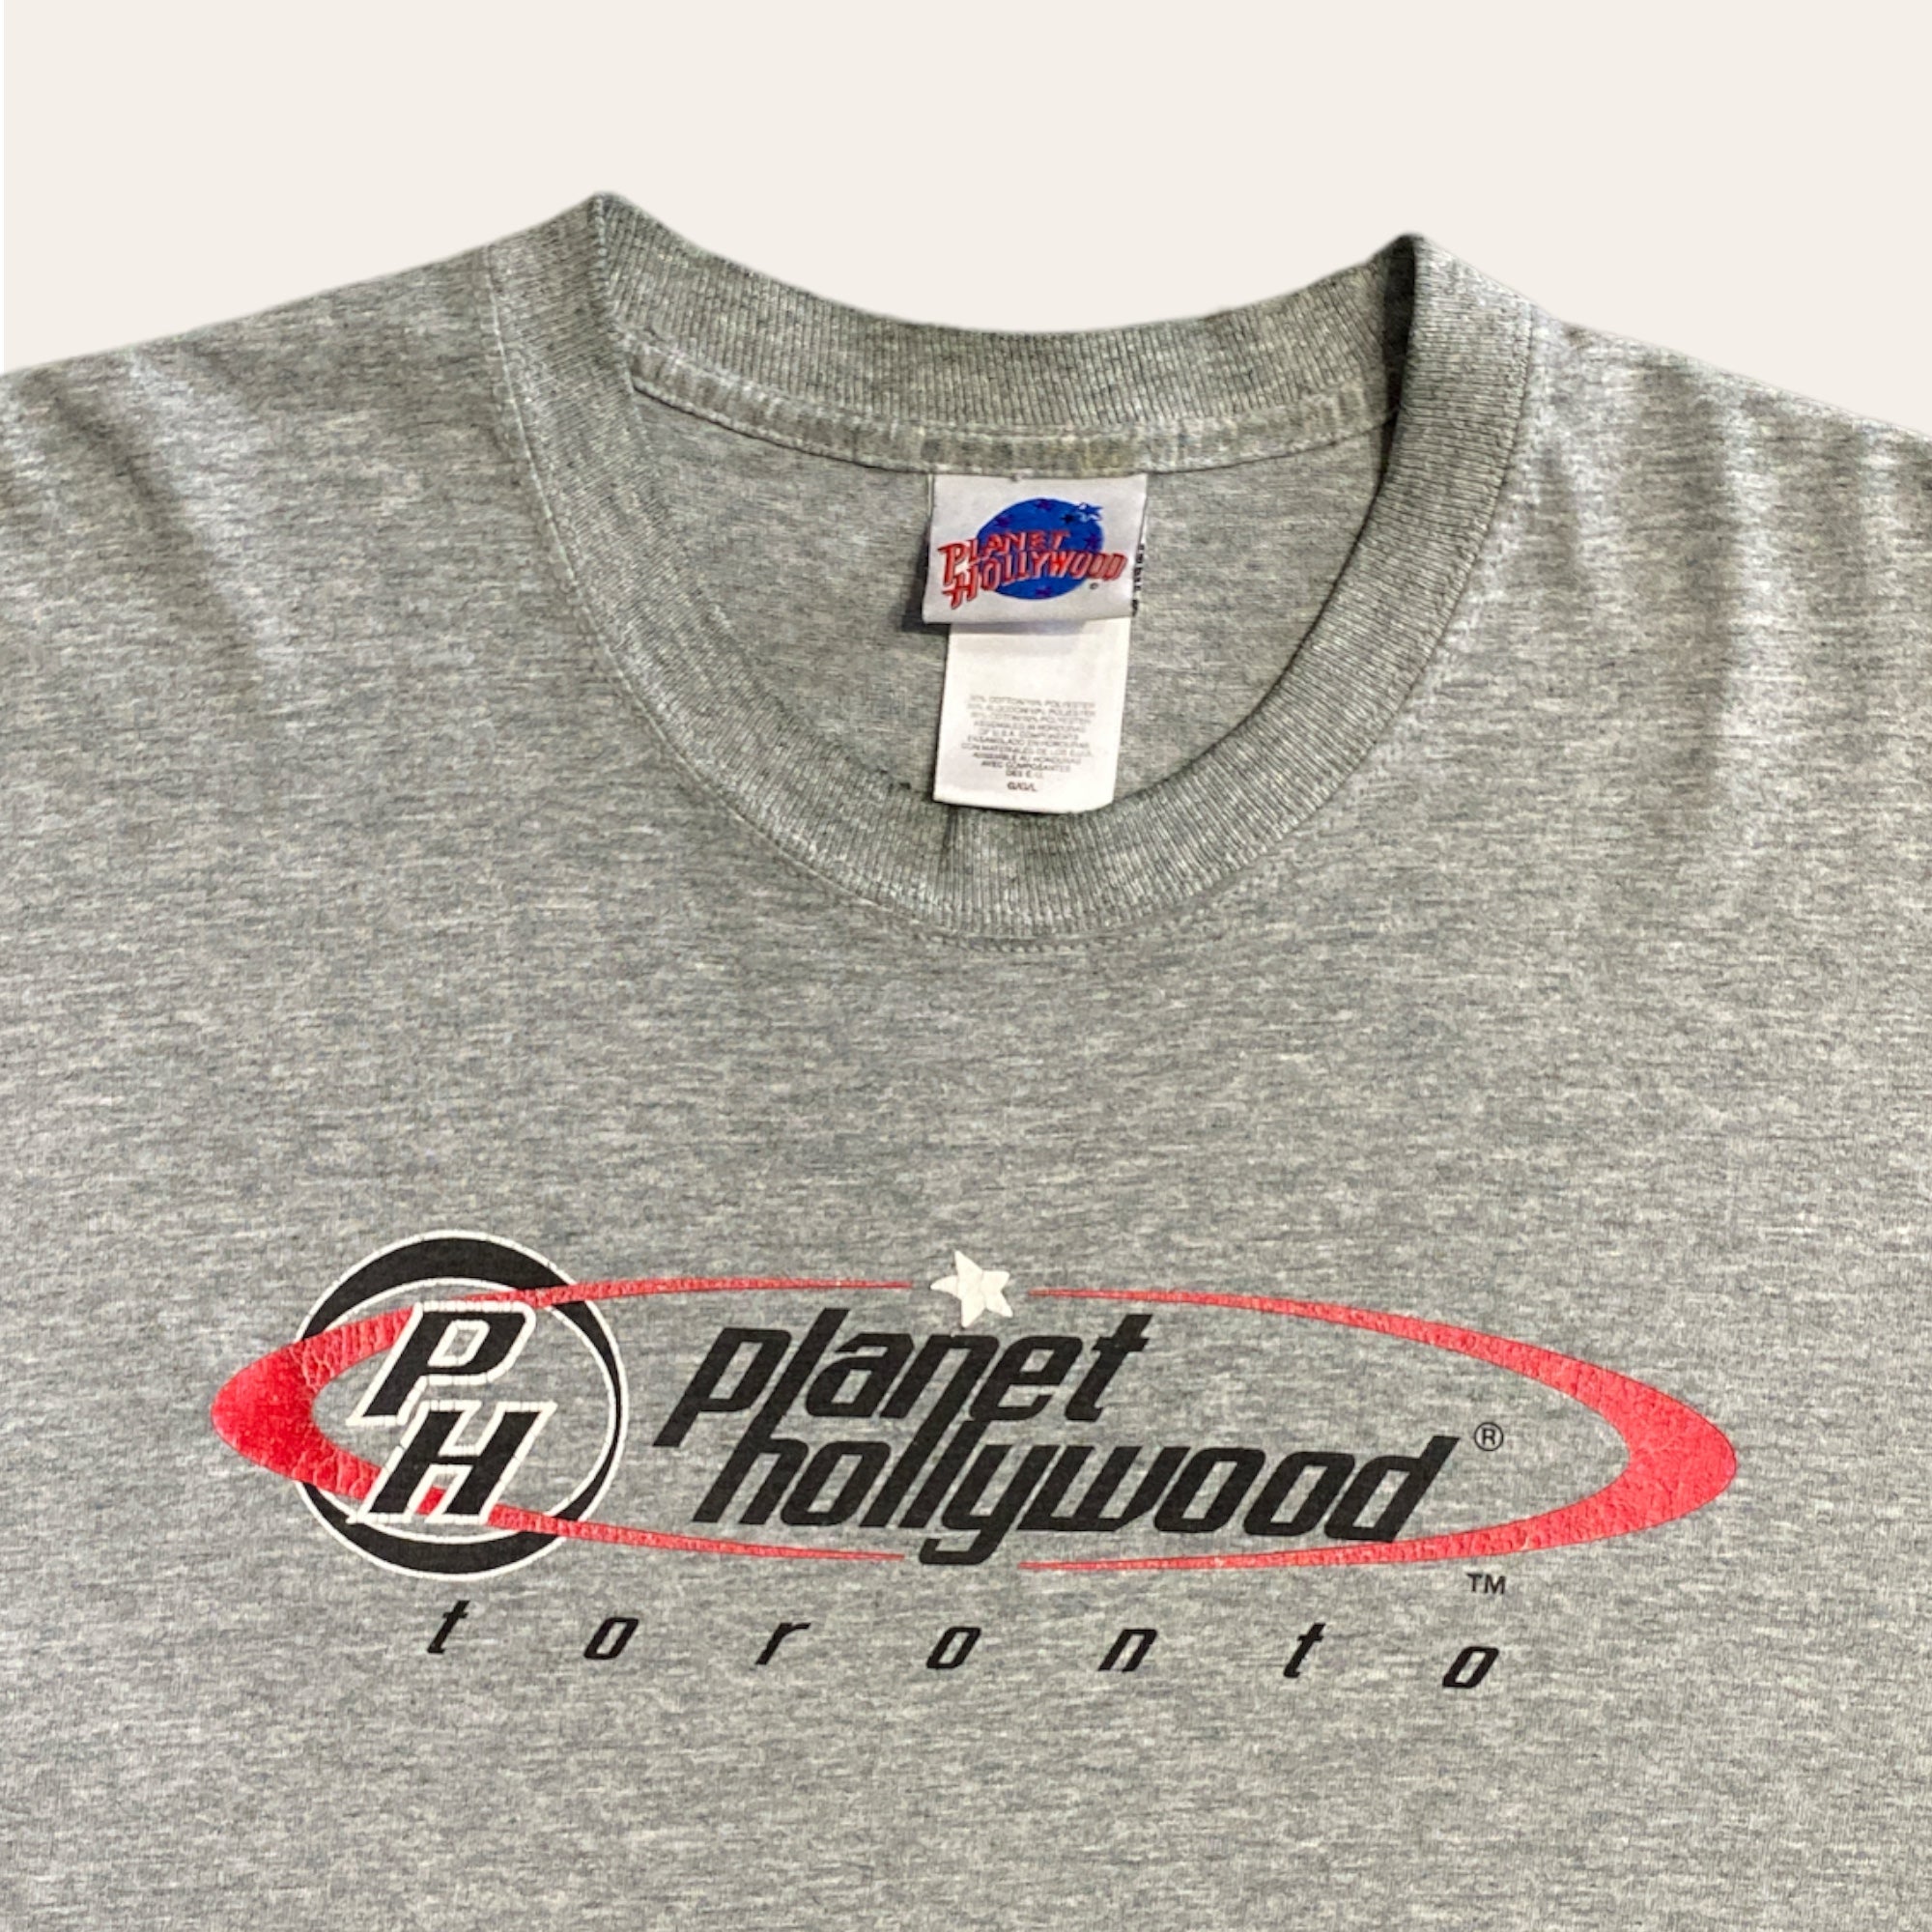 2000 Planet Hollywood Toronto Tee Size L